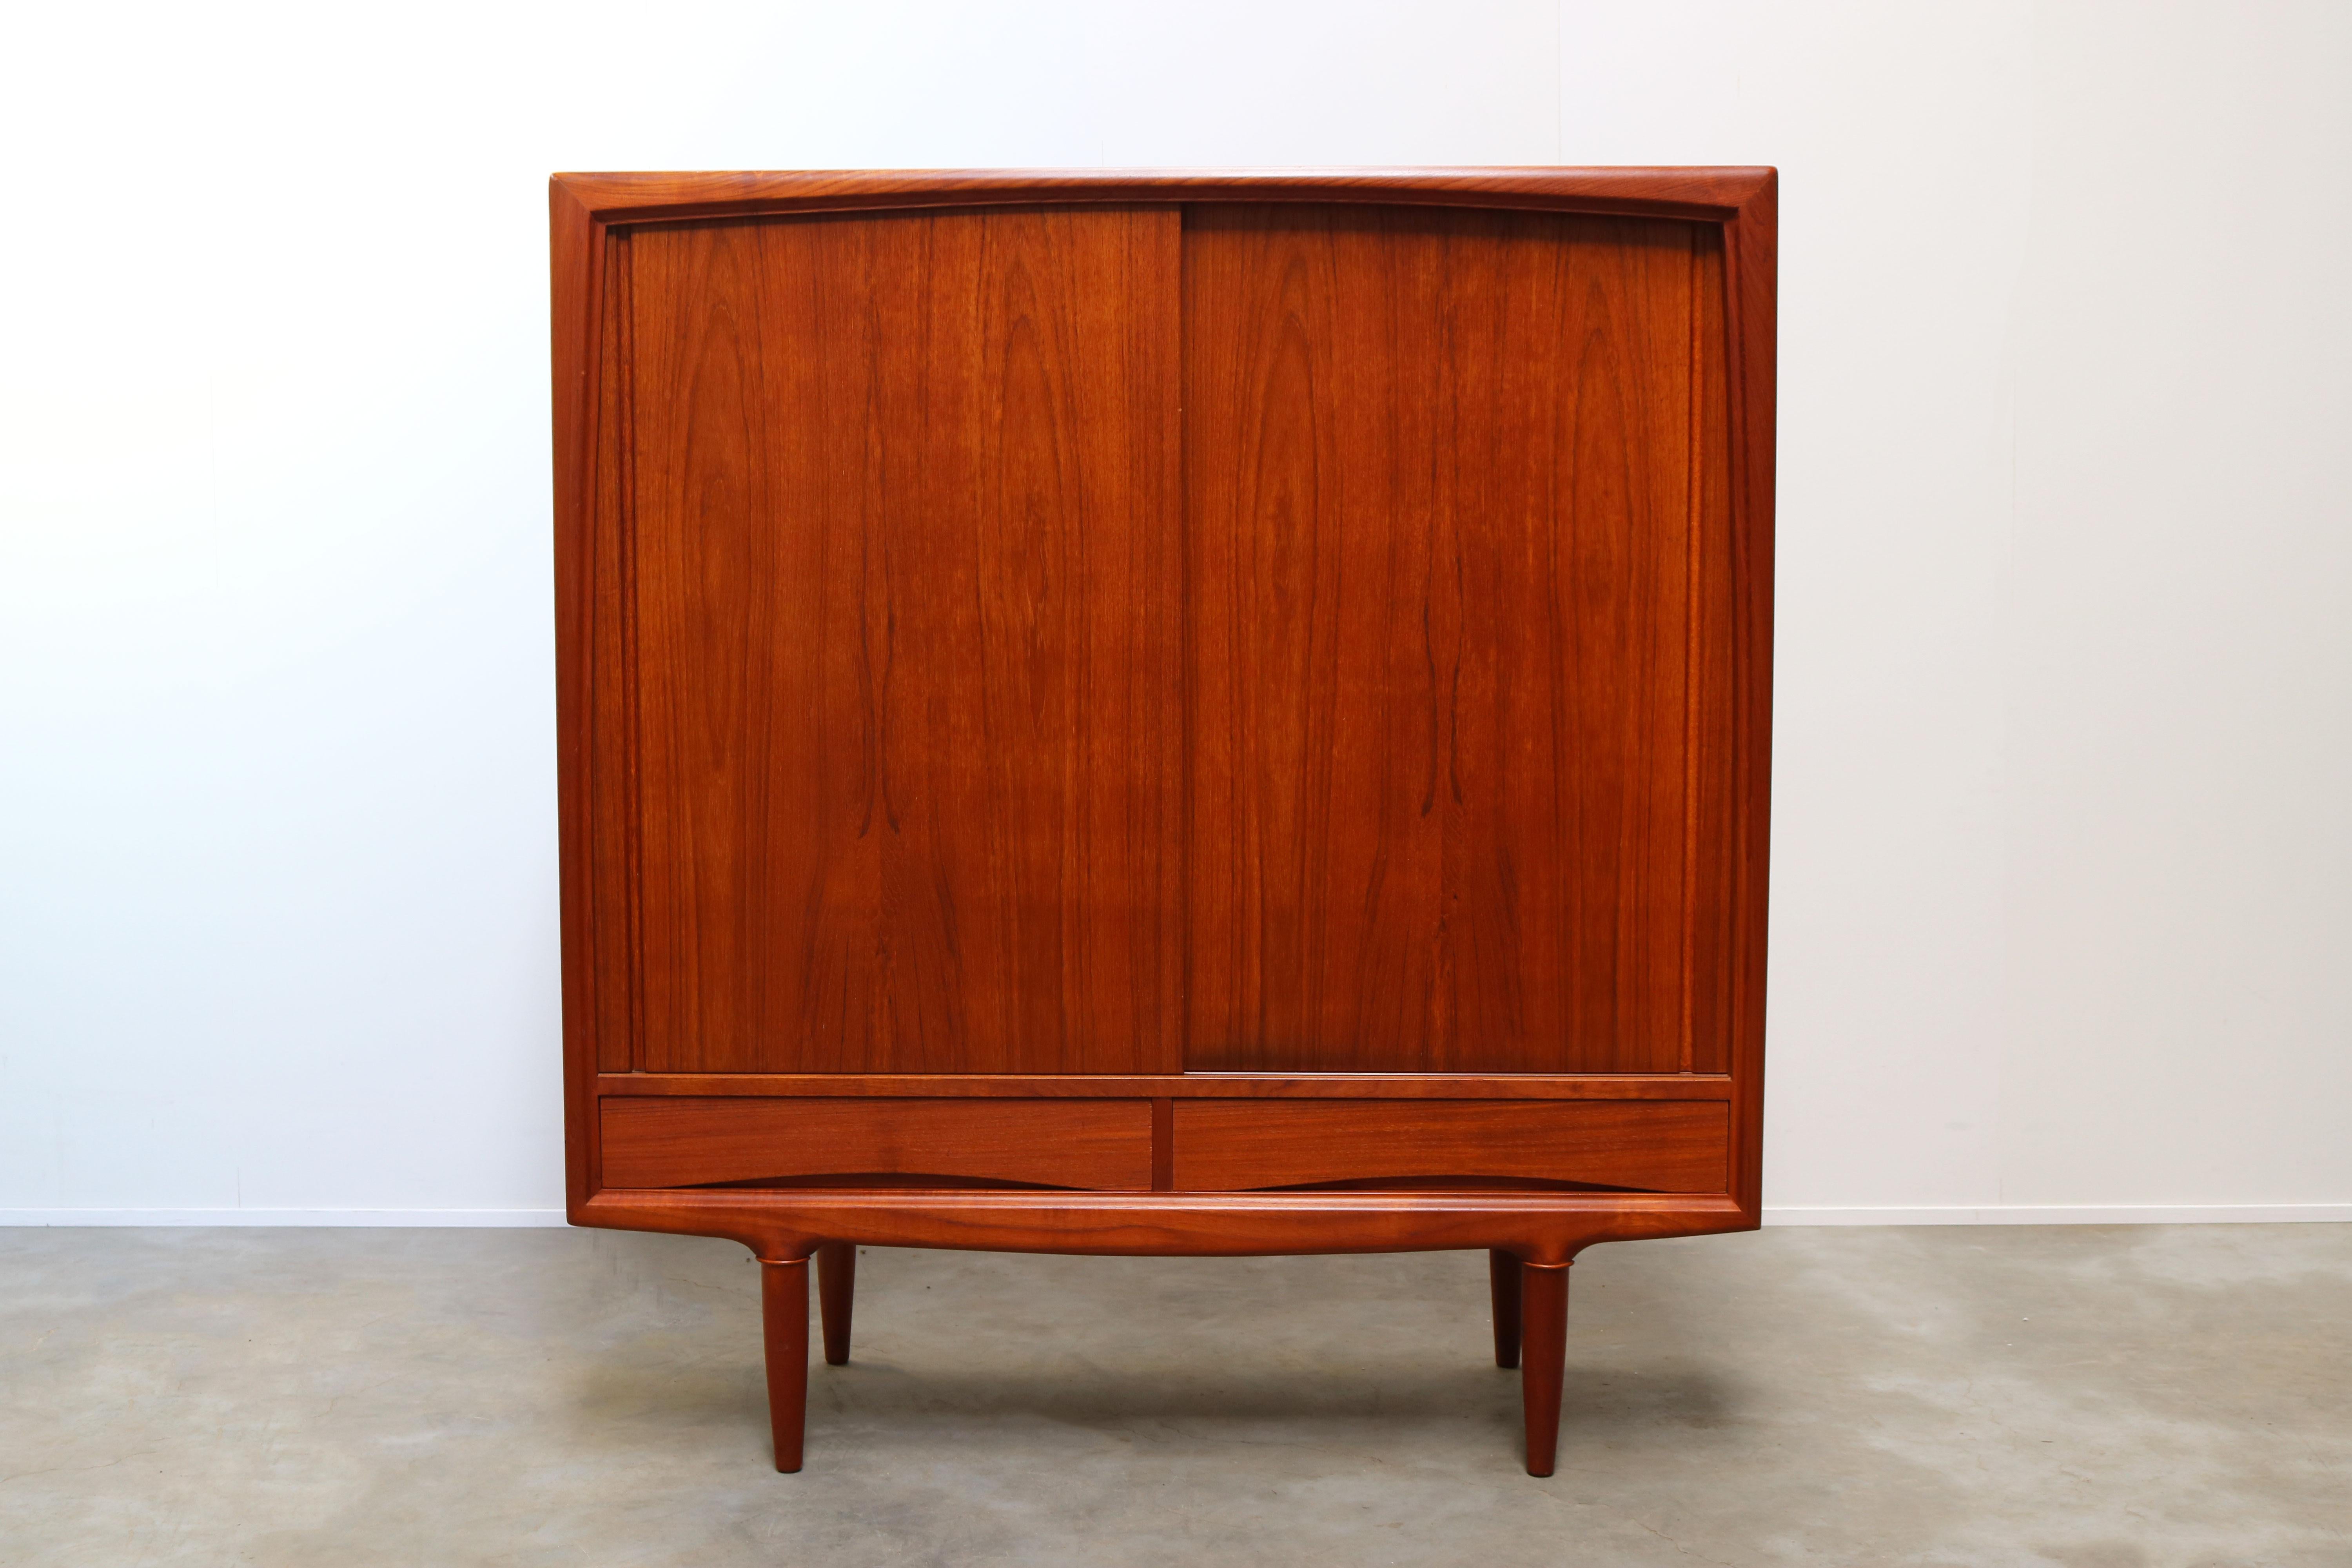 Magnificent Danish highboard / cabinet by danish designer Gunni Omann for Aco Mobler in the 1950s.
Wonderful organic design in teak. The cabinet has 2 sliding doors and 2 drawers. The interior has multiple adjustable shelves and 5 drawers providing